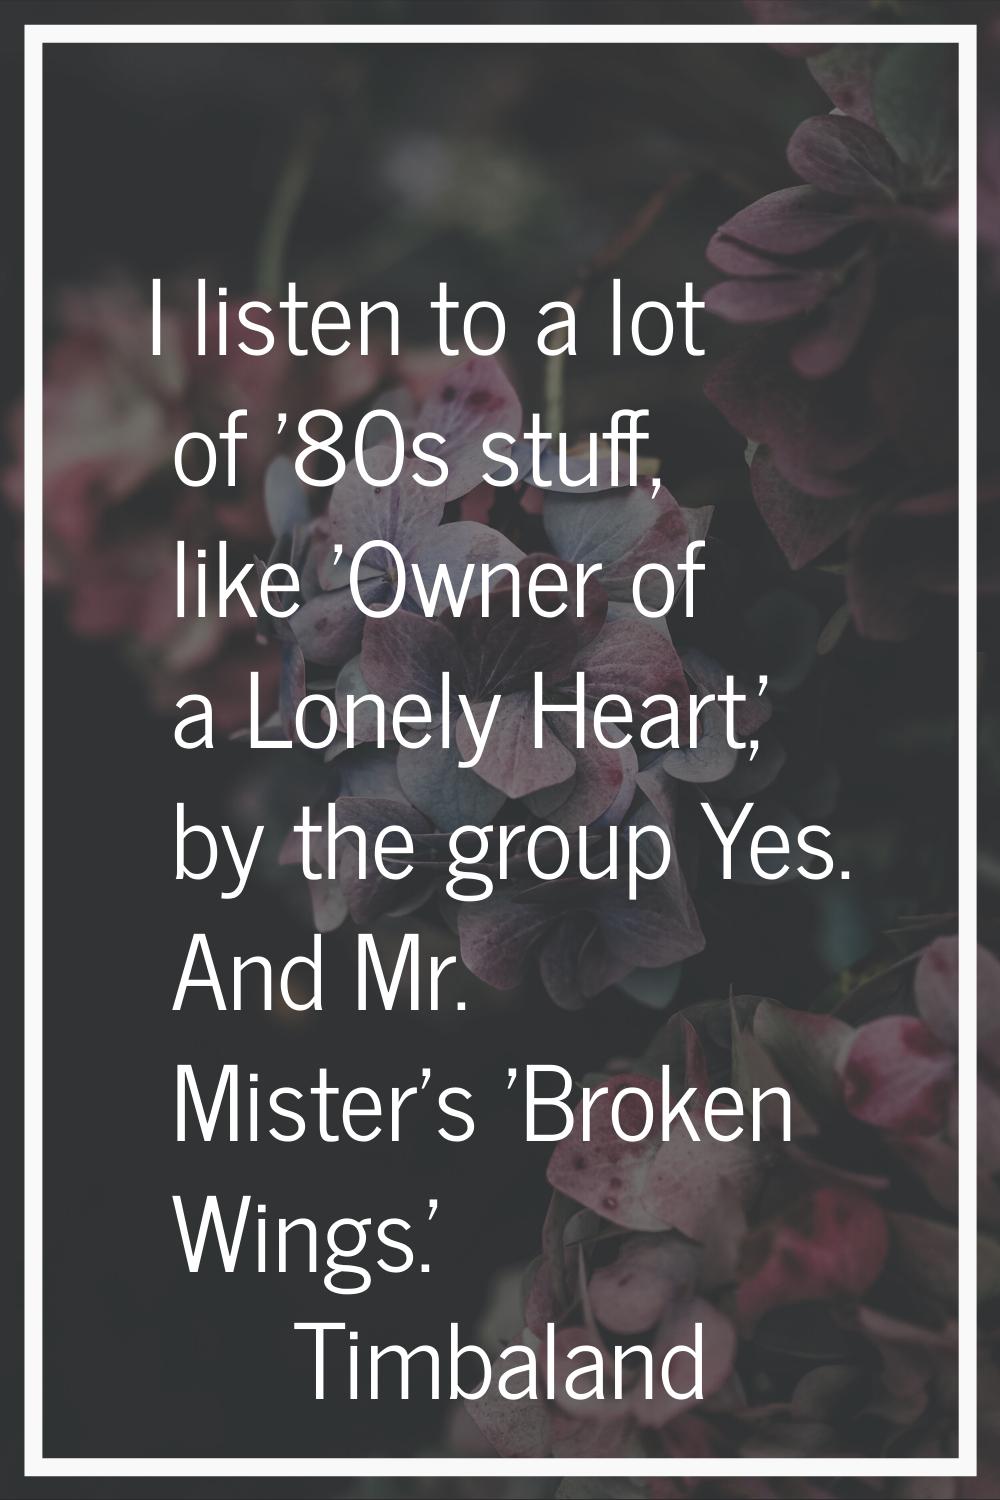 I listen to a lot of '80s stuff, like 'Owner of a Lonely Heart,' by the group Yes. And Mr. Mister's